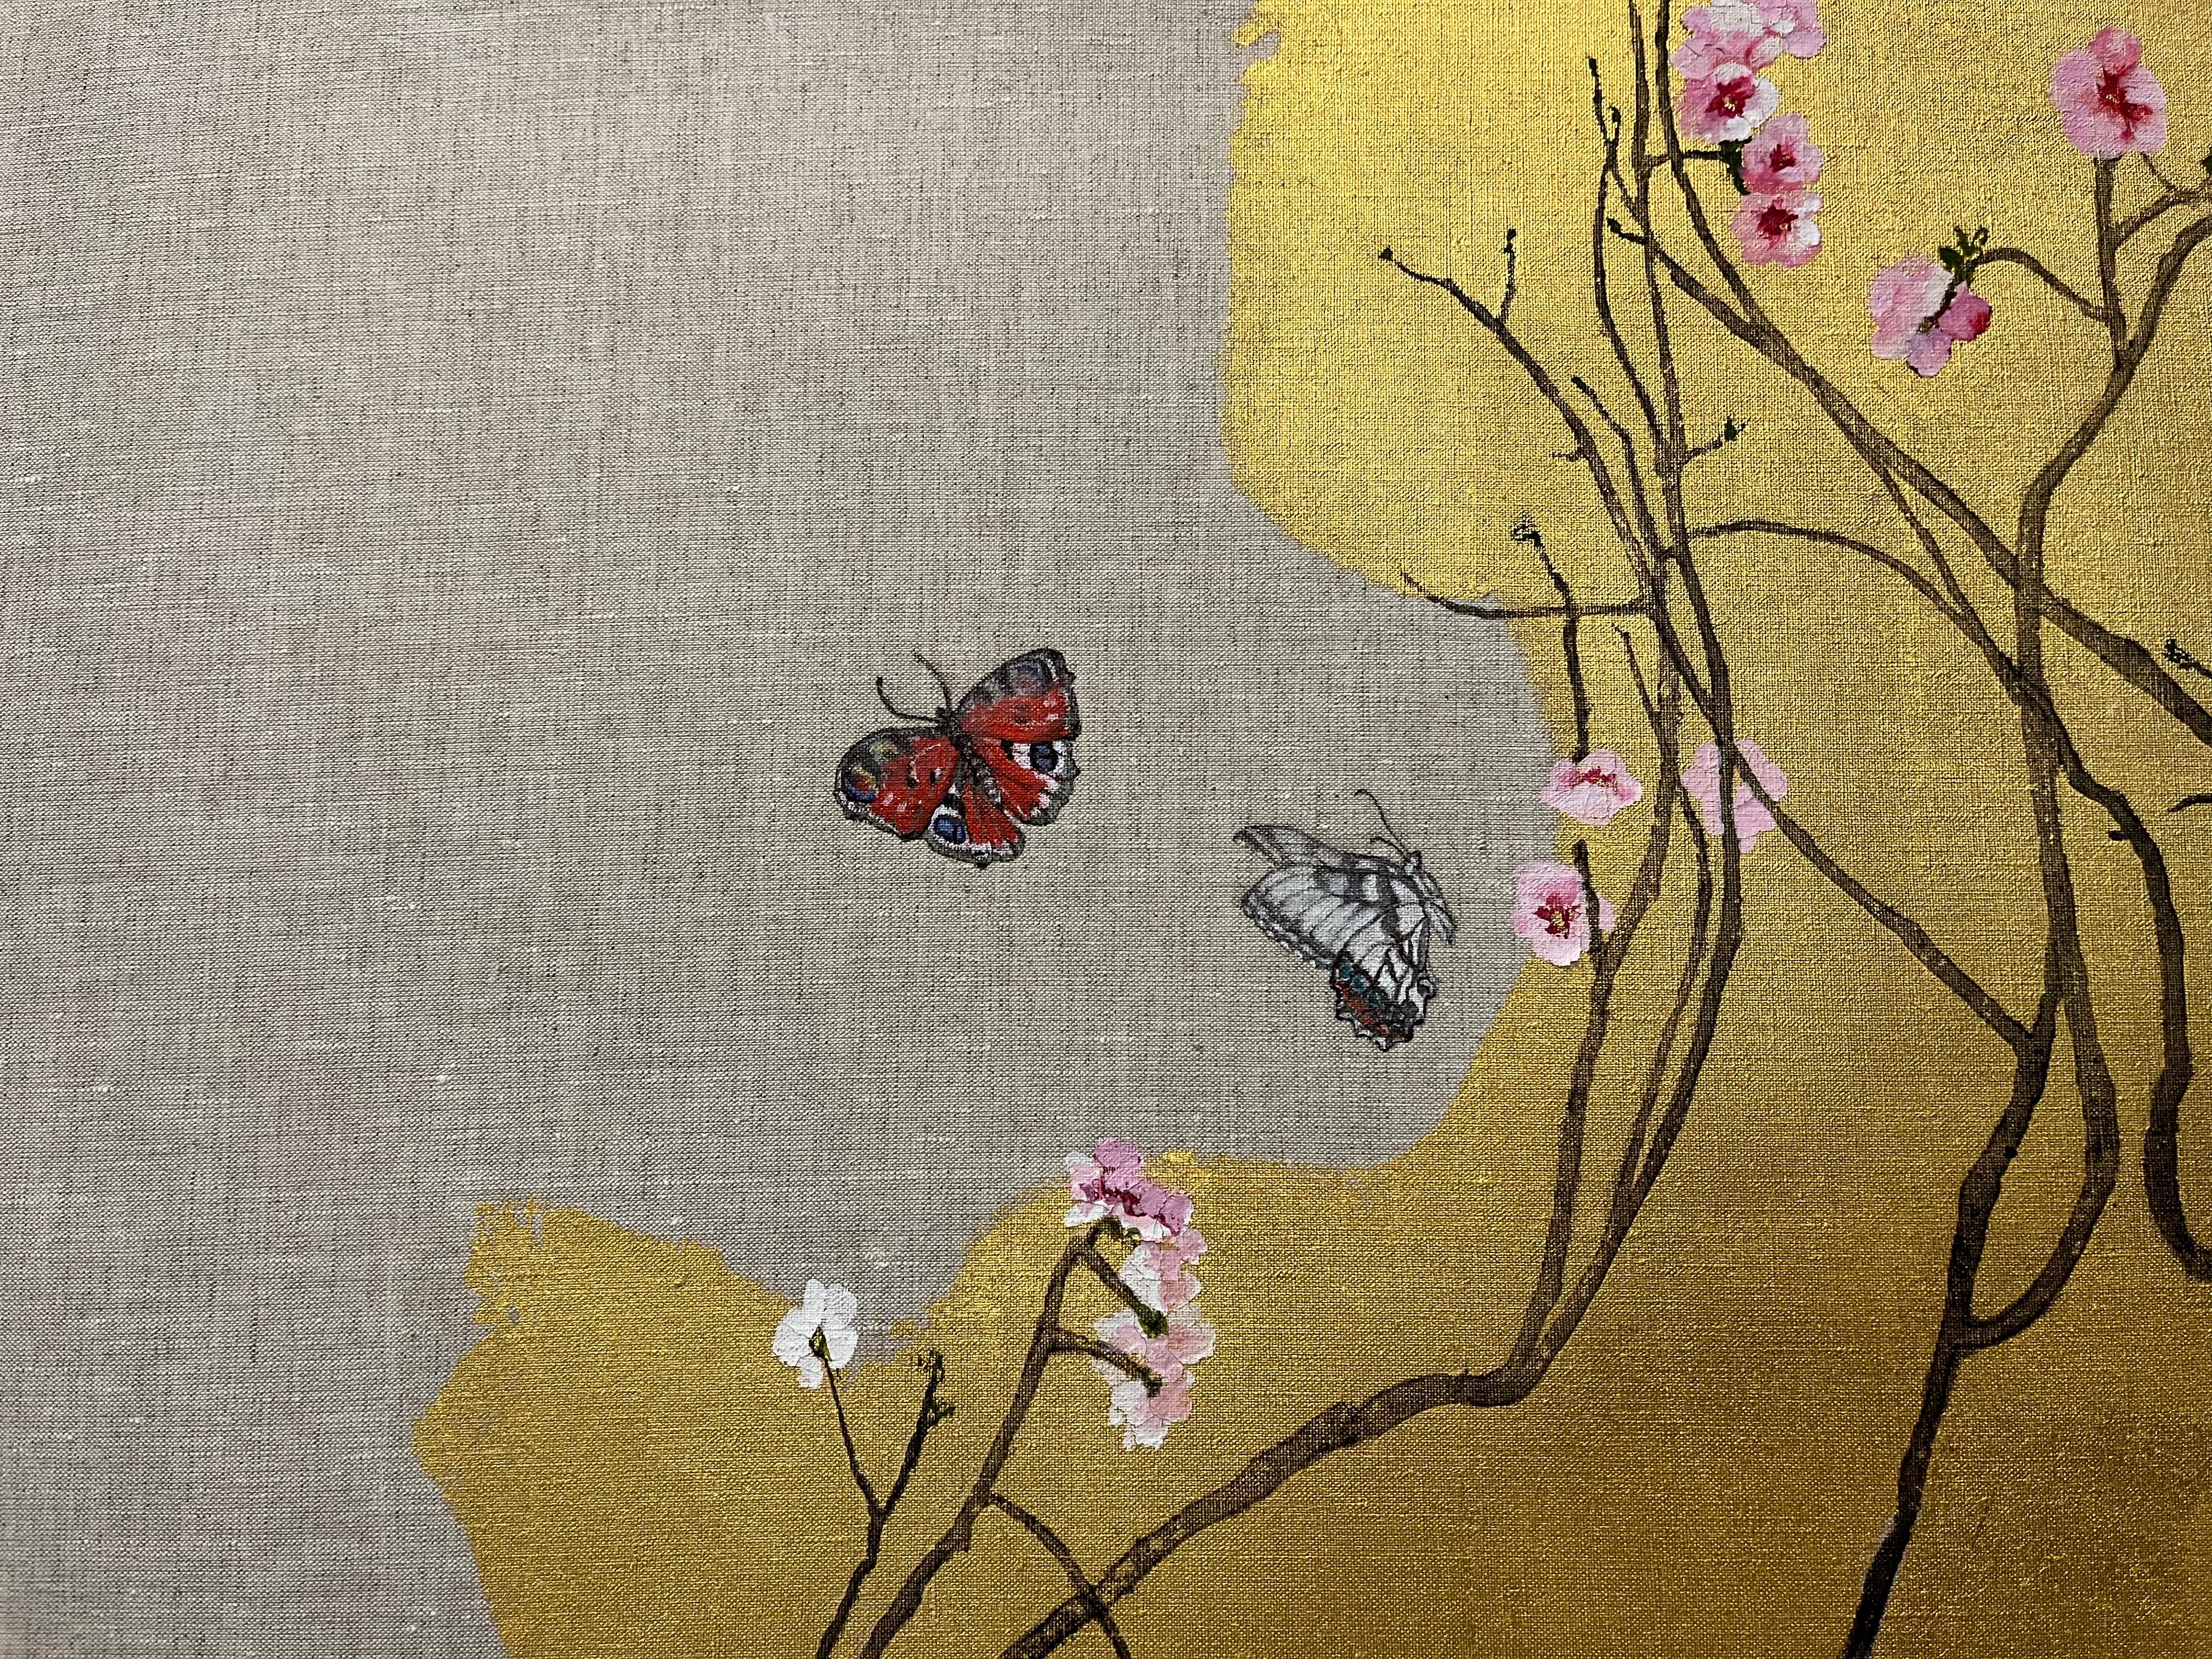 Peach blossom, pink and butterflies, on gold foreground painting. Innovative - Painting by Margherita Leoni